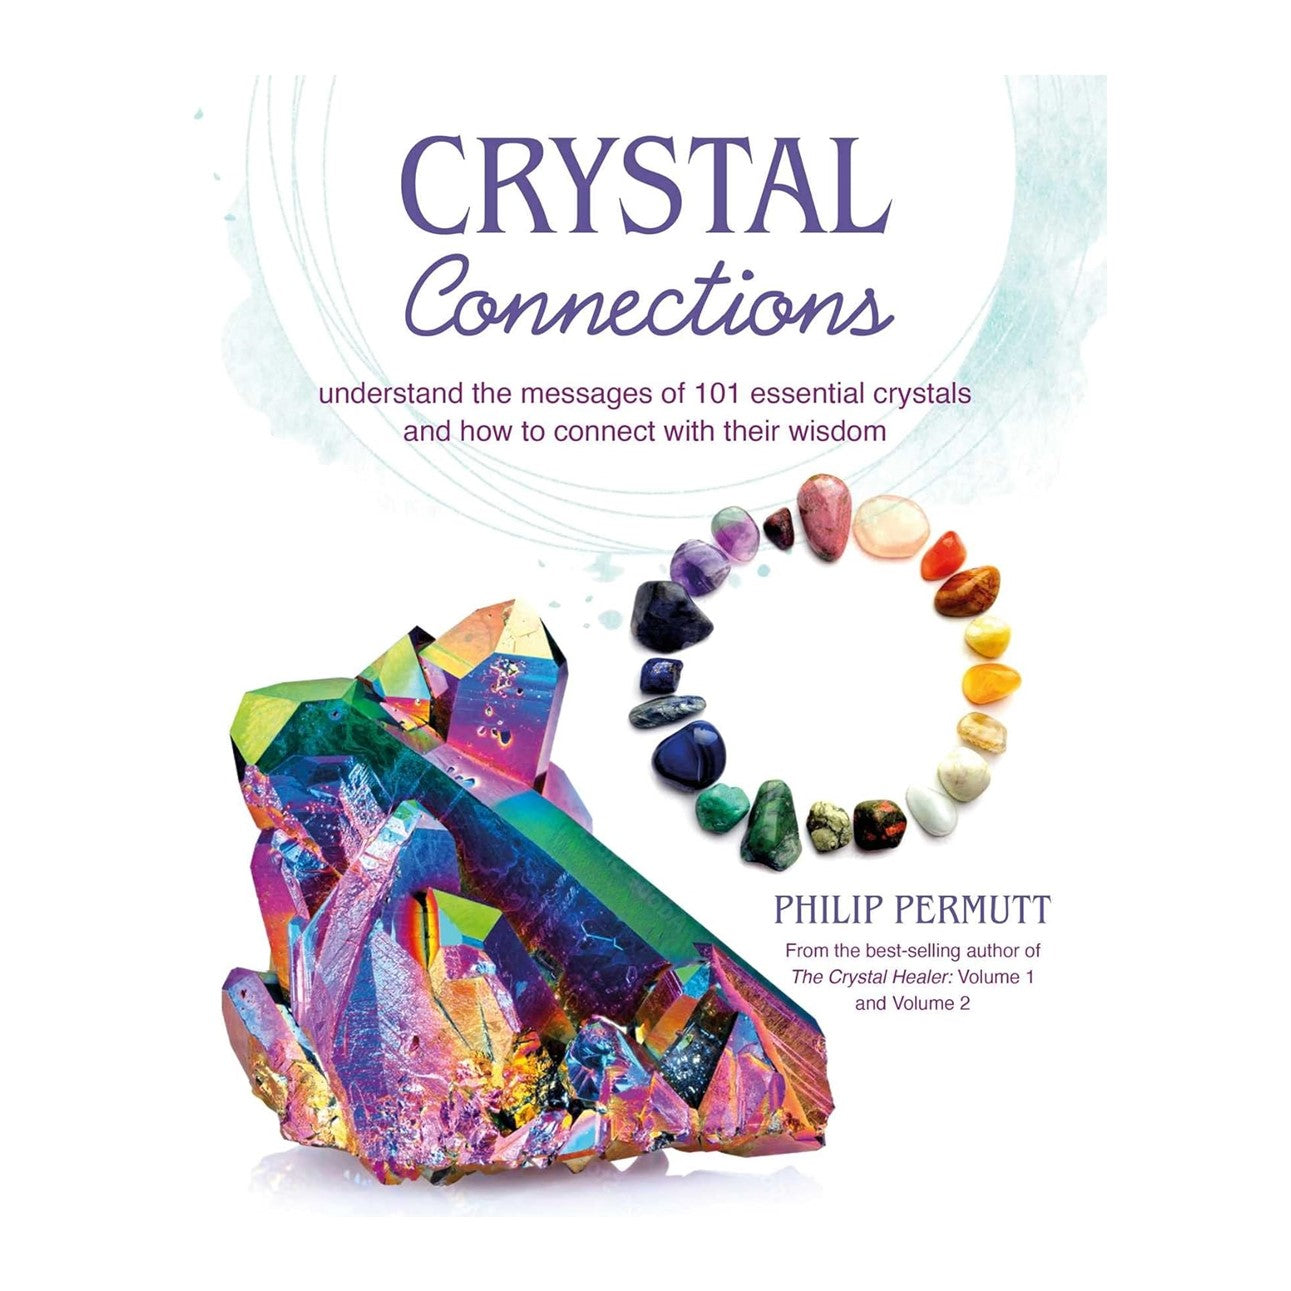 Crystal Connections